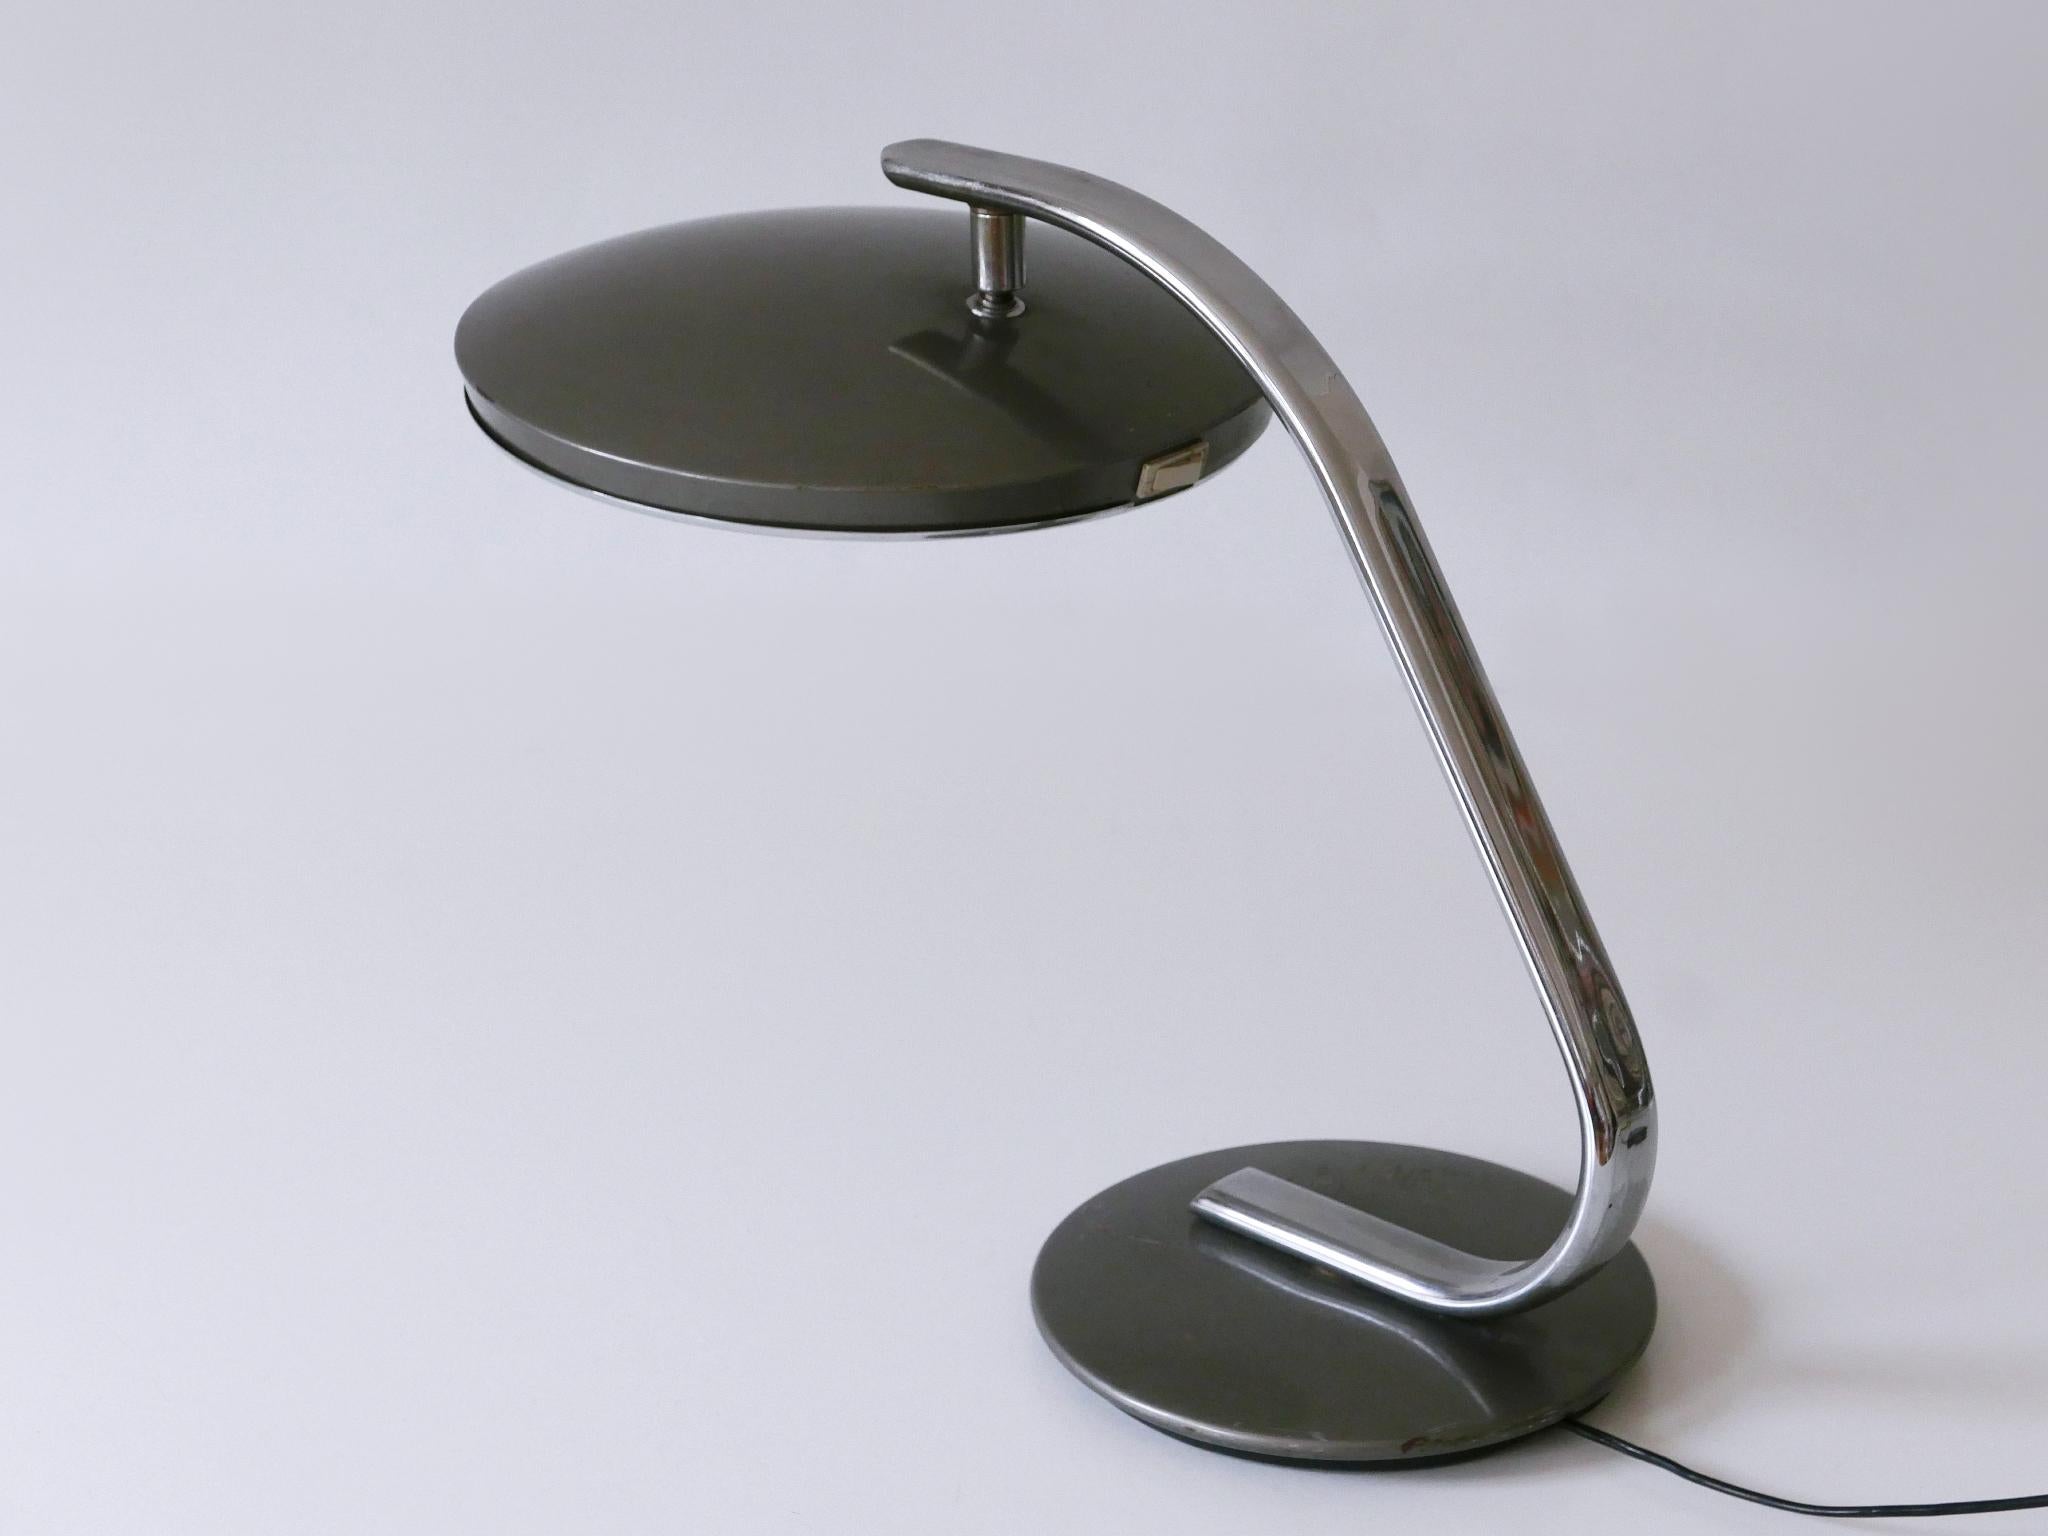 Enameled Mid Century Modern Desk Light or Table Lamp 'Boomerang' by Fase Spain 1960s For Sale